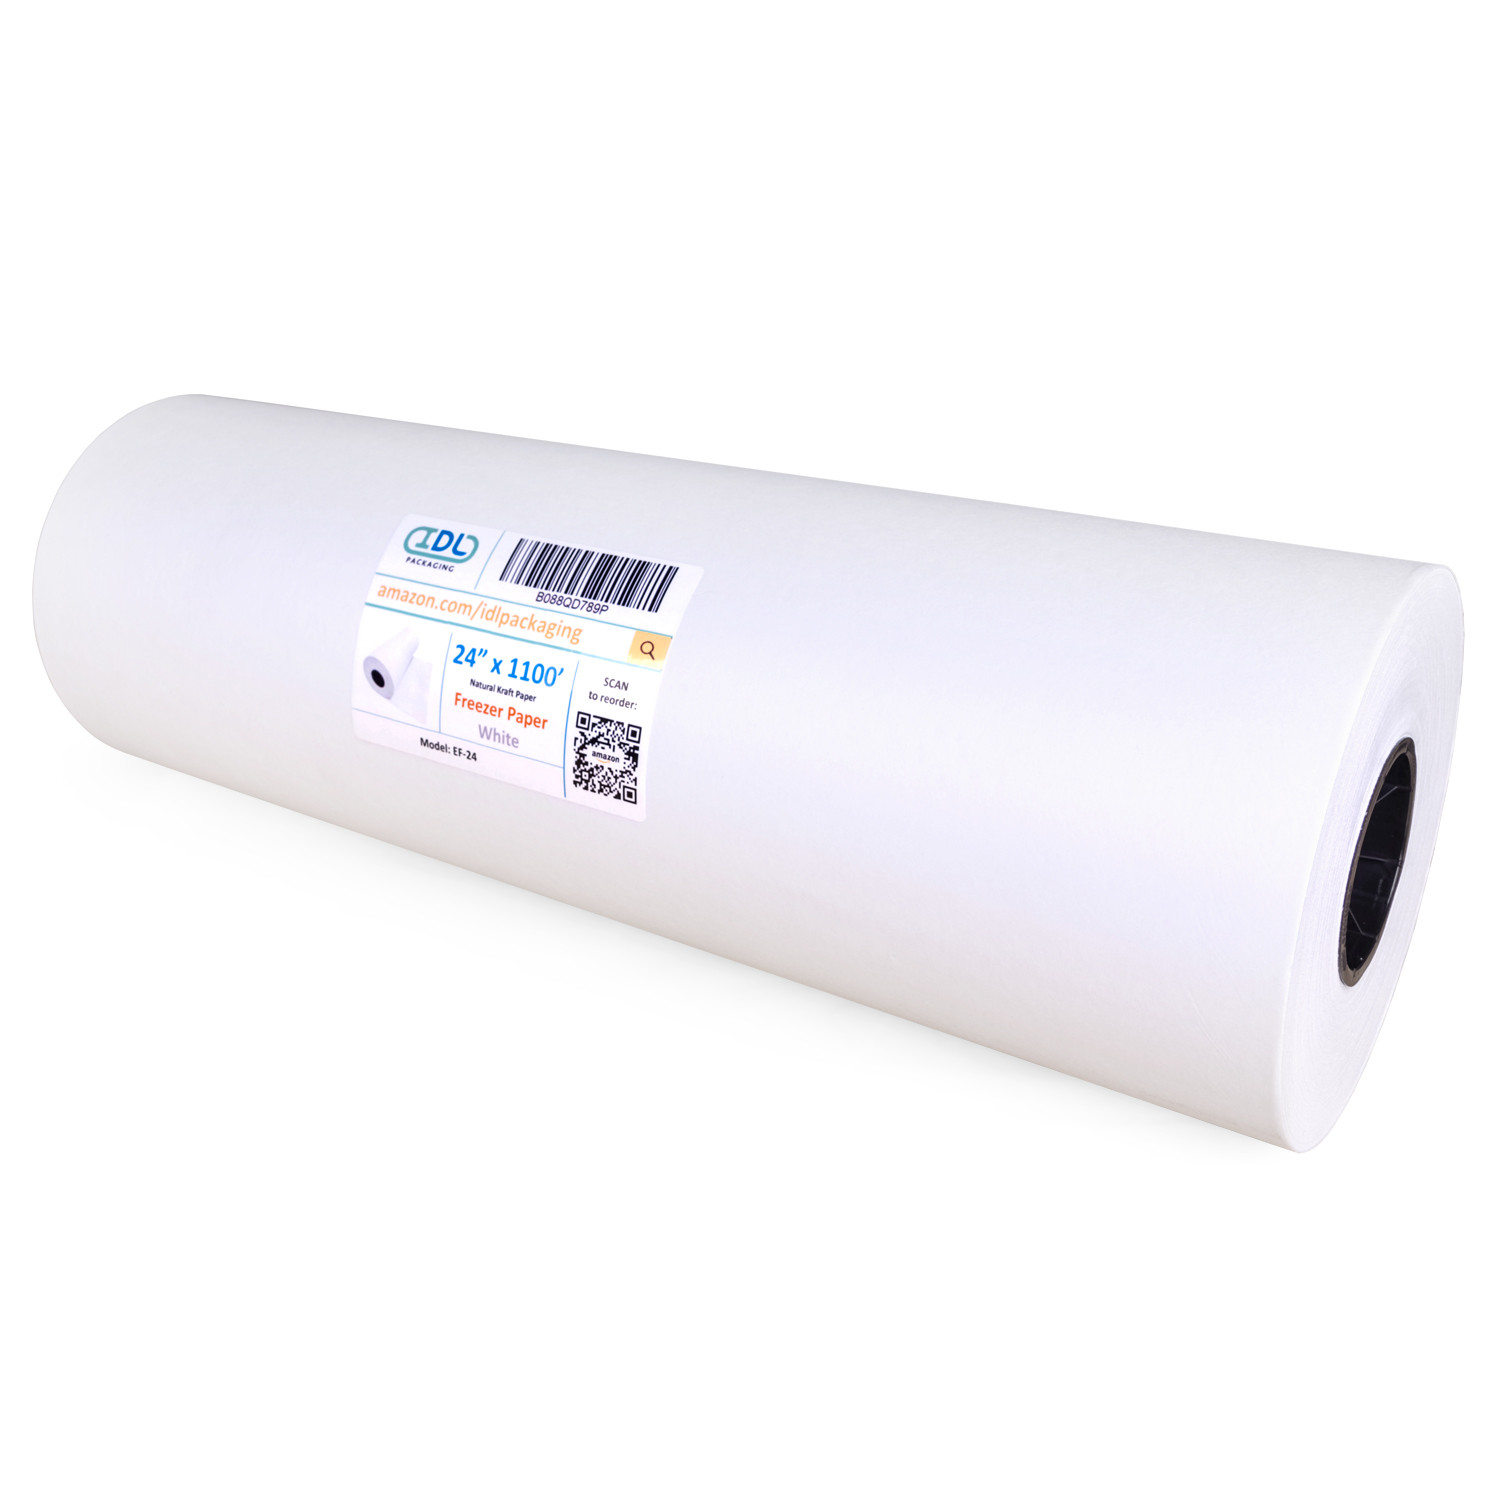 PD-W24 Wall Mounted Kraft Paper Roll Dispenser & Cutter for Rolls up to 24  Wide and 9 in Diameter buy in stock in U.S. in IDL Packaging